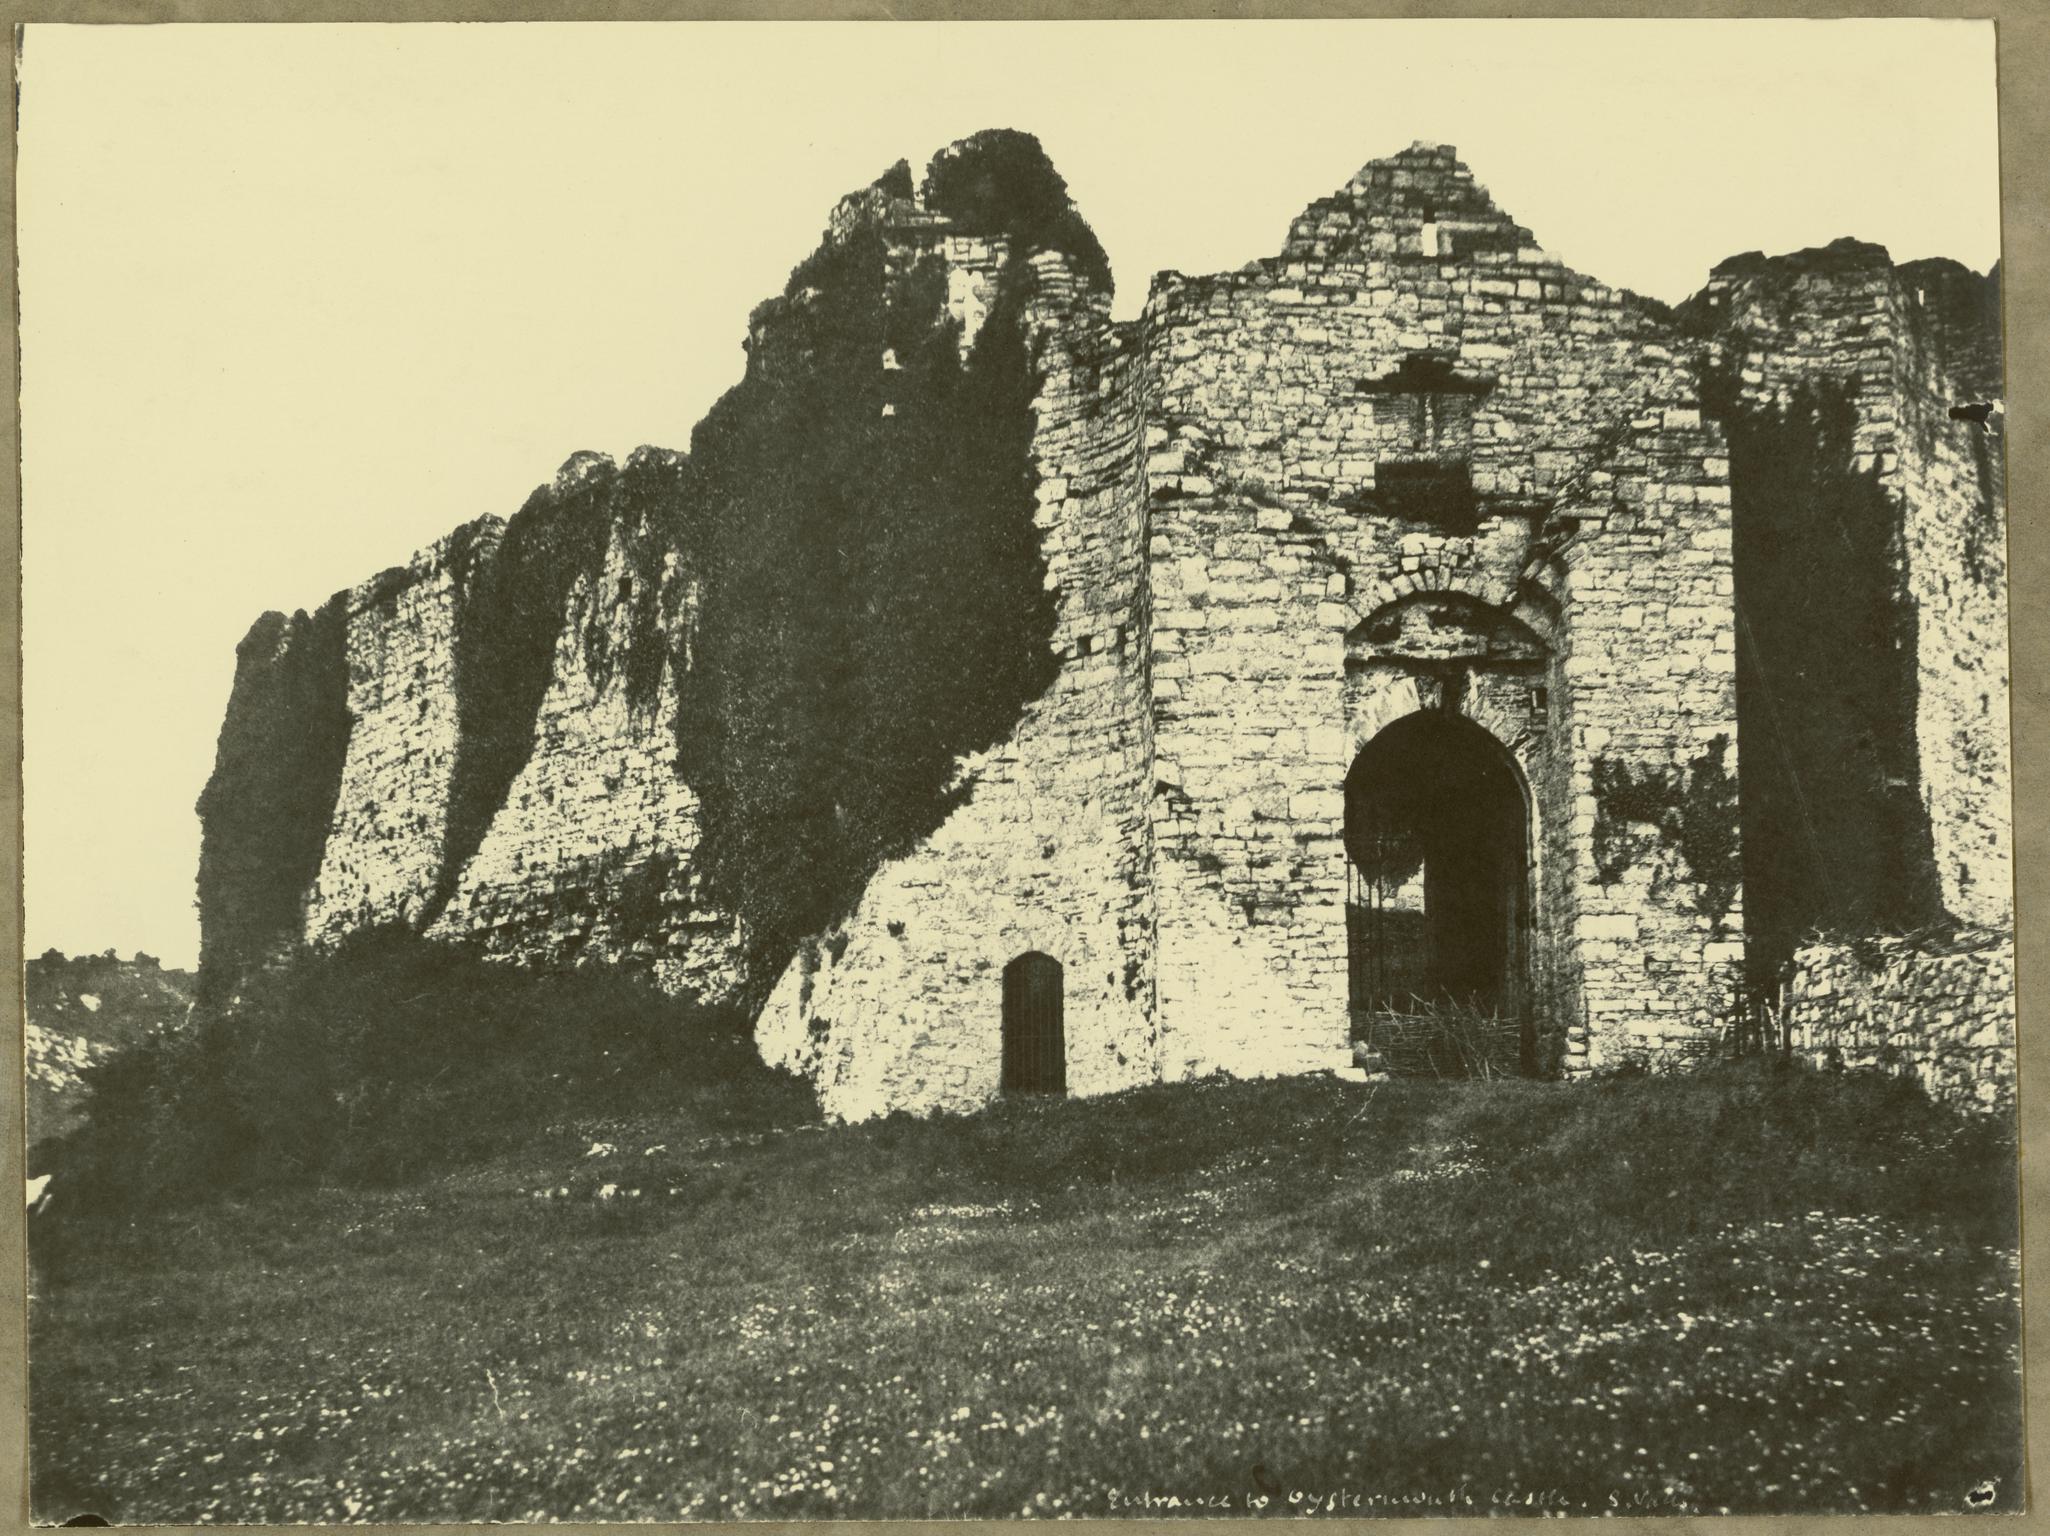 Entrance to Oystermouth Castle